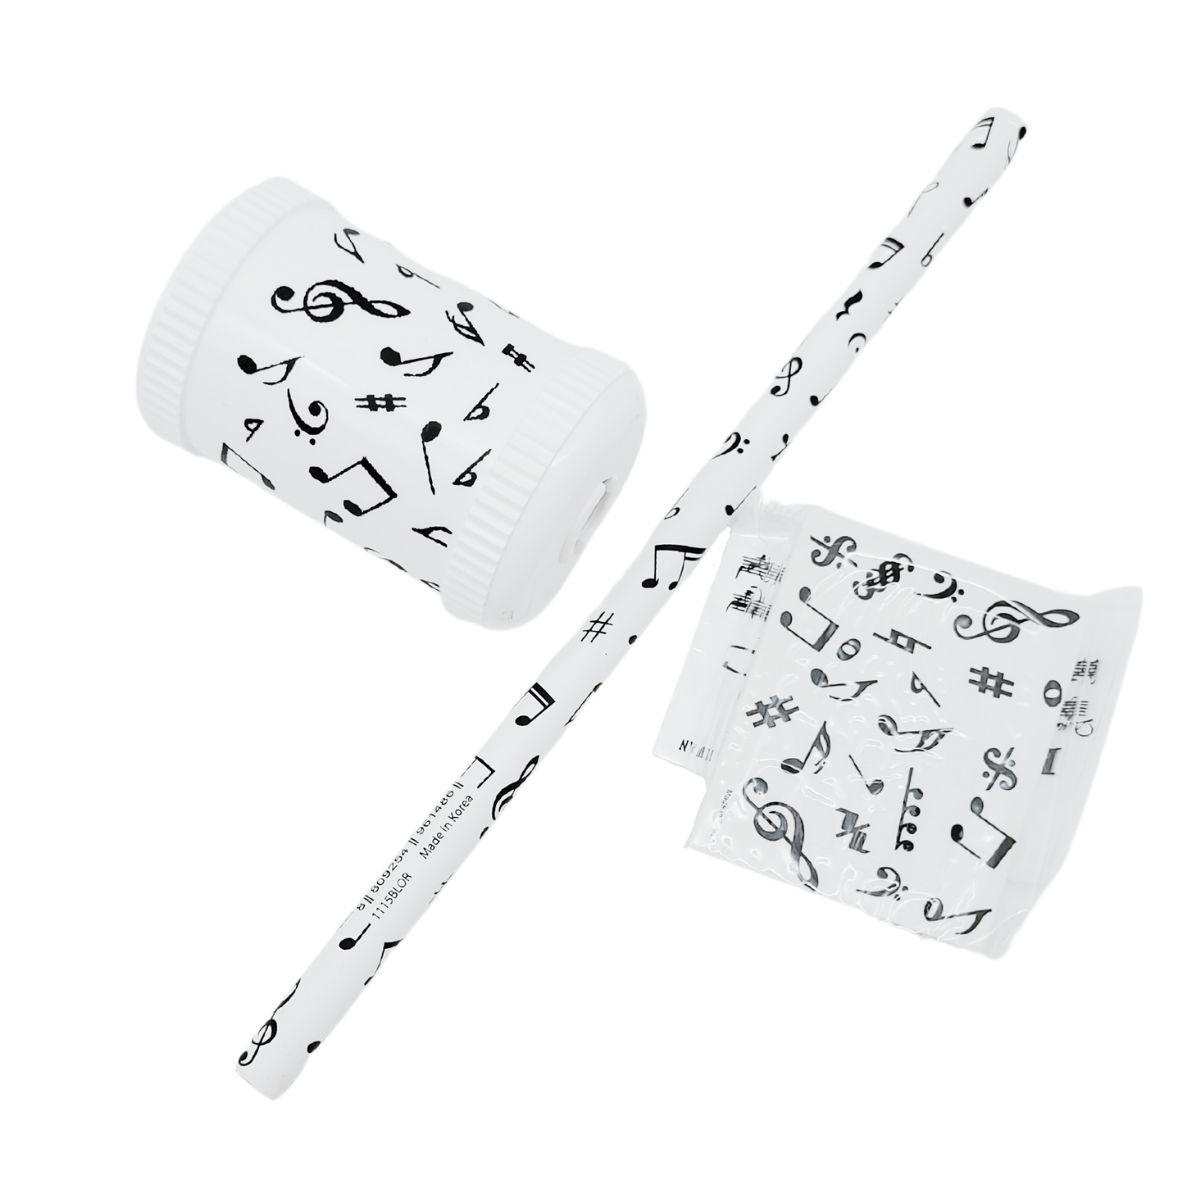 Writing set white with note mix pencil, sharpener round box and eraser